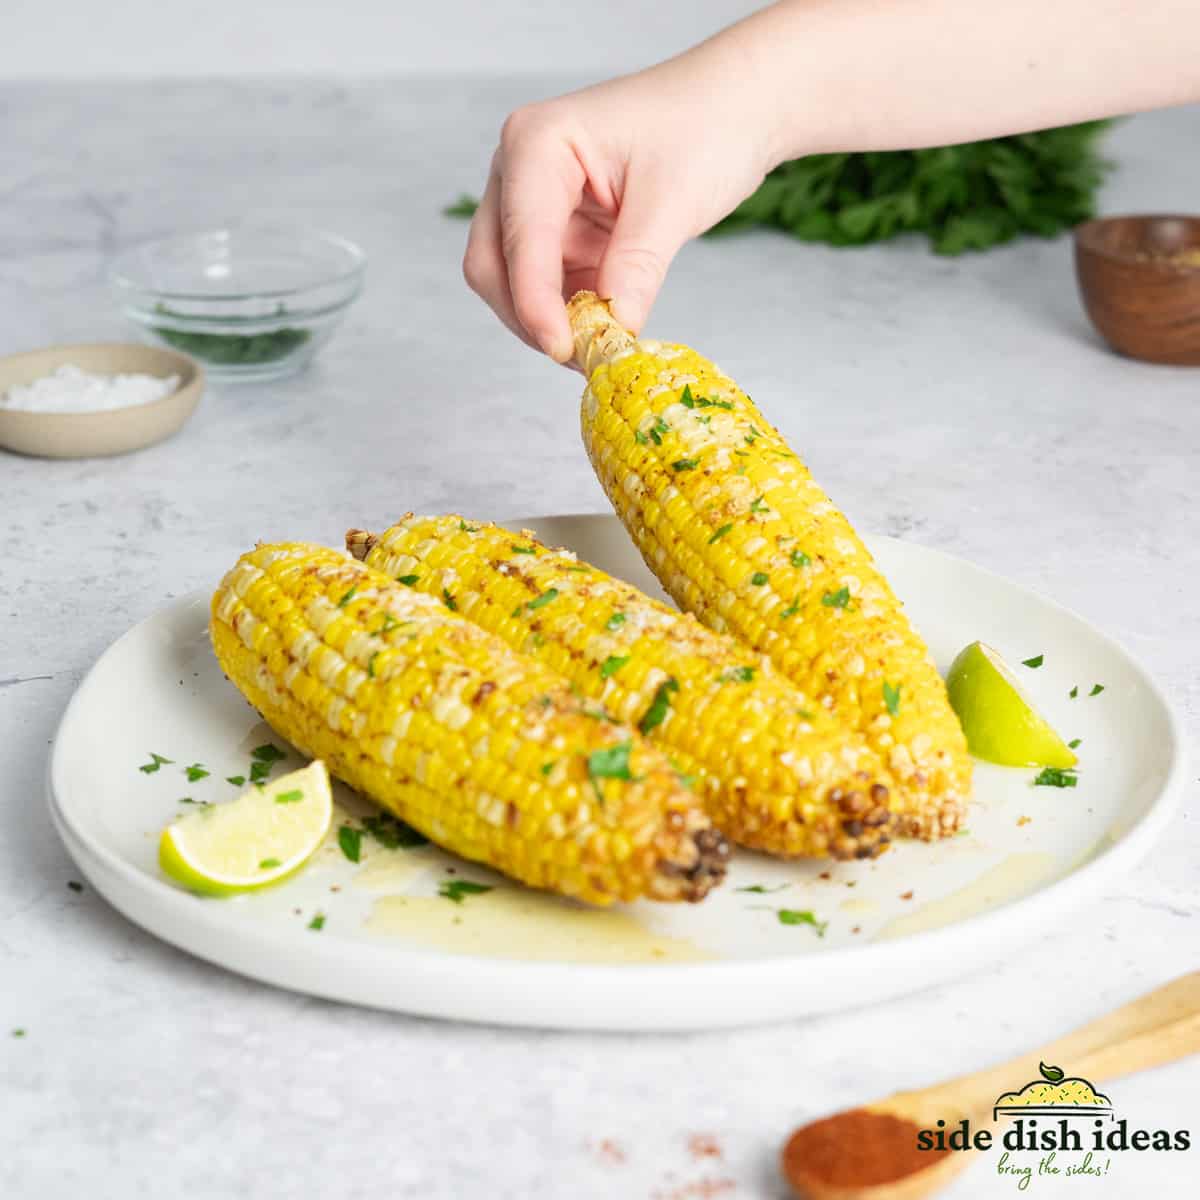 Three pieces of air fried corn on the cob on a white platter with limes and herbs